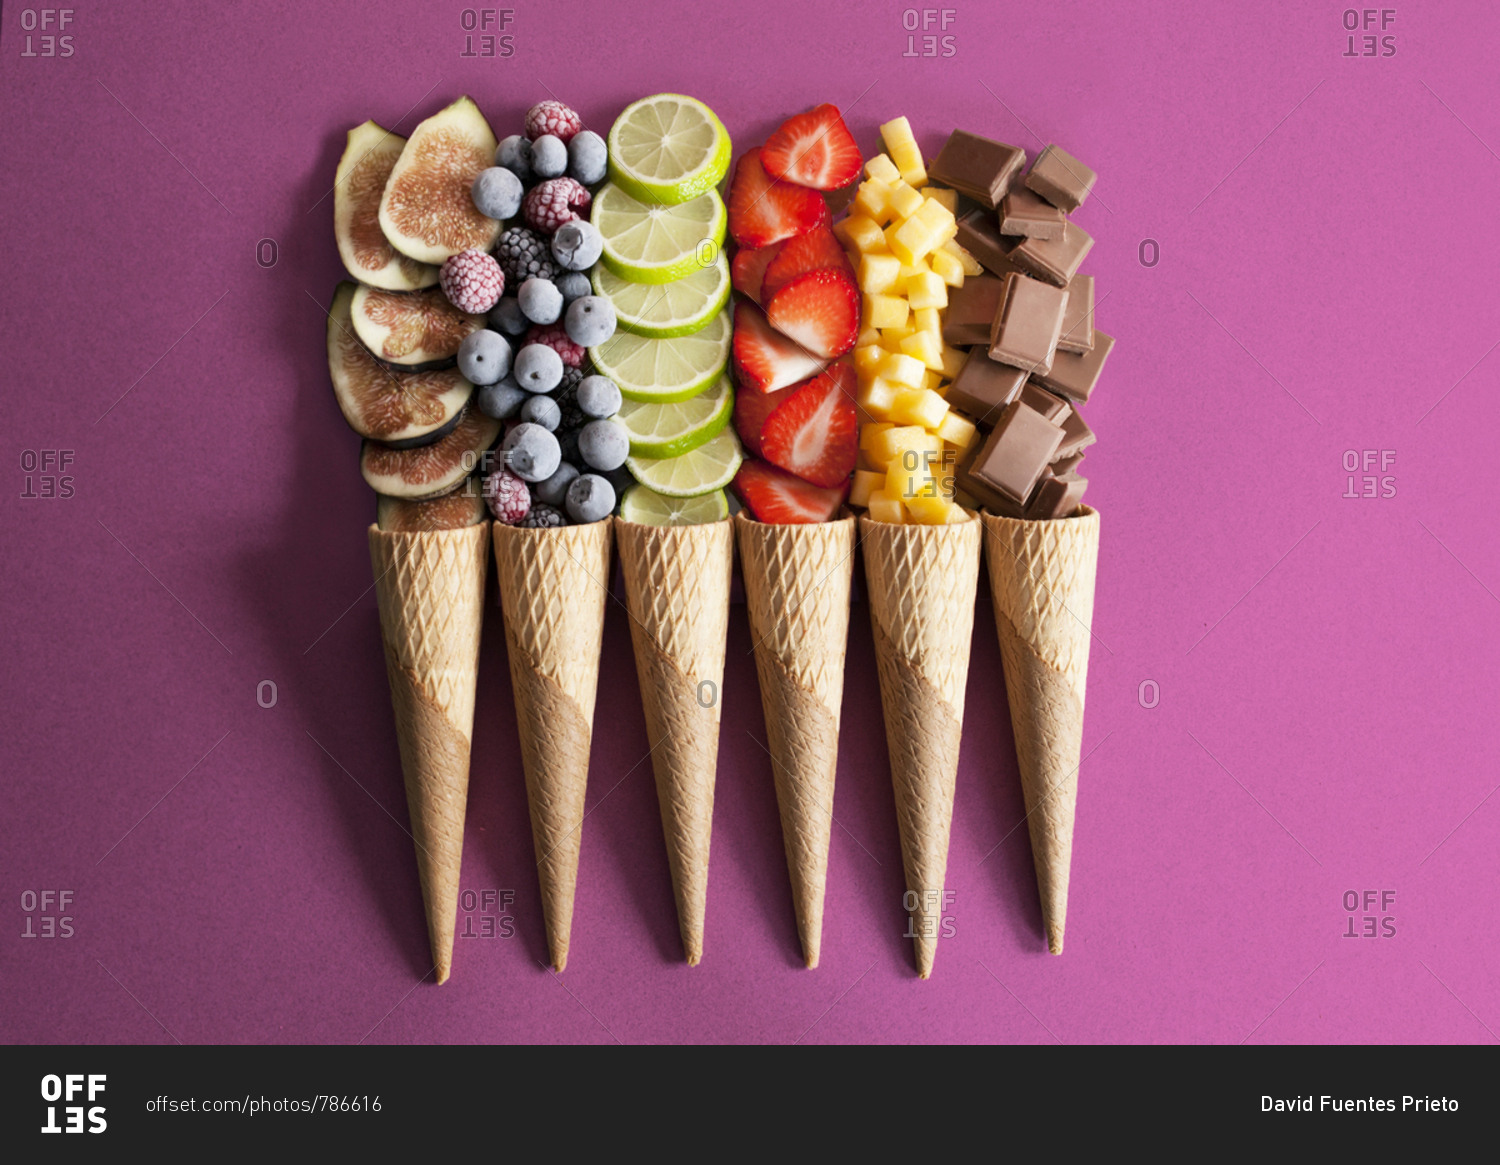 Fruit cones such as strawberry, blueberry, peach, fig, blackberry, lime accompanied by chocolate